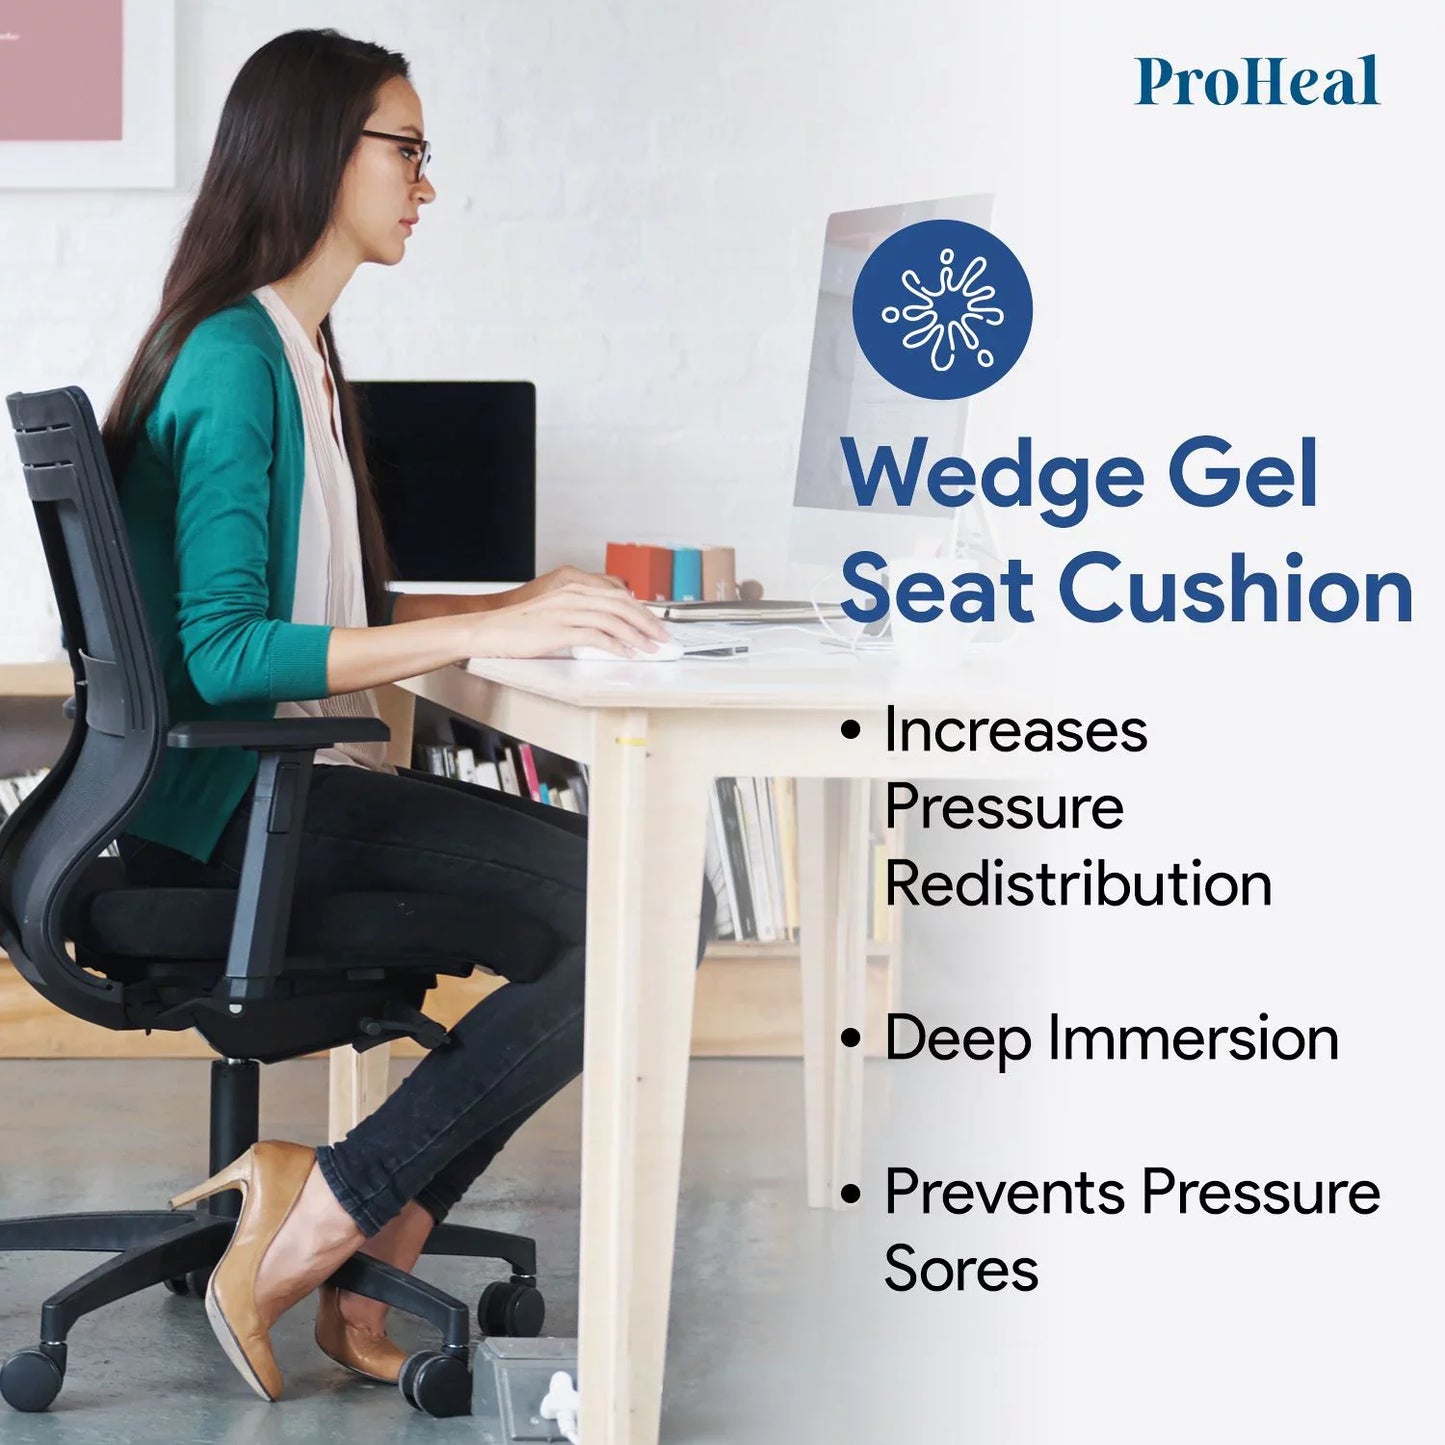 Gel Wedge Wheelchair Seat Cushion For Posture & Pressure Relief